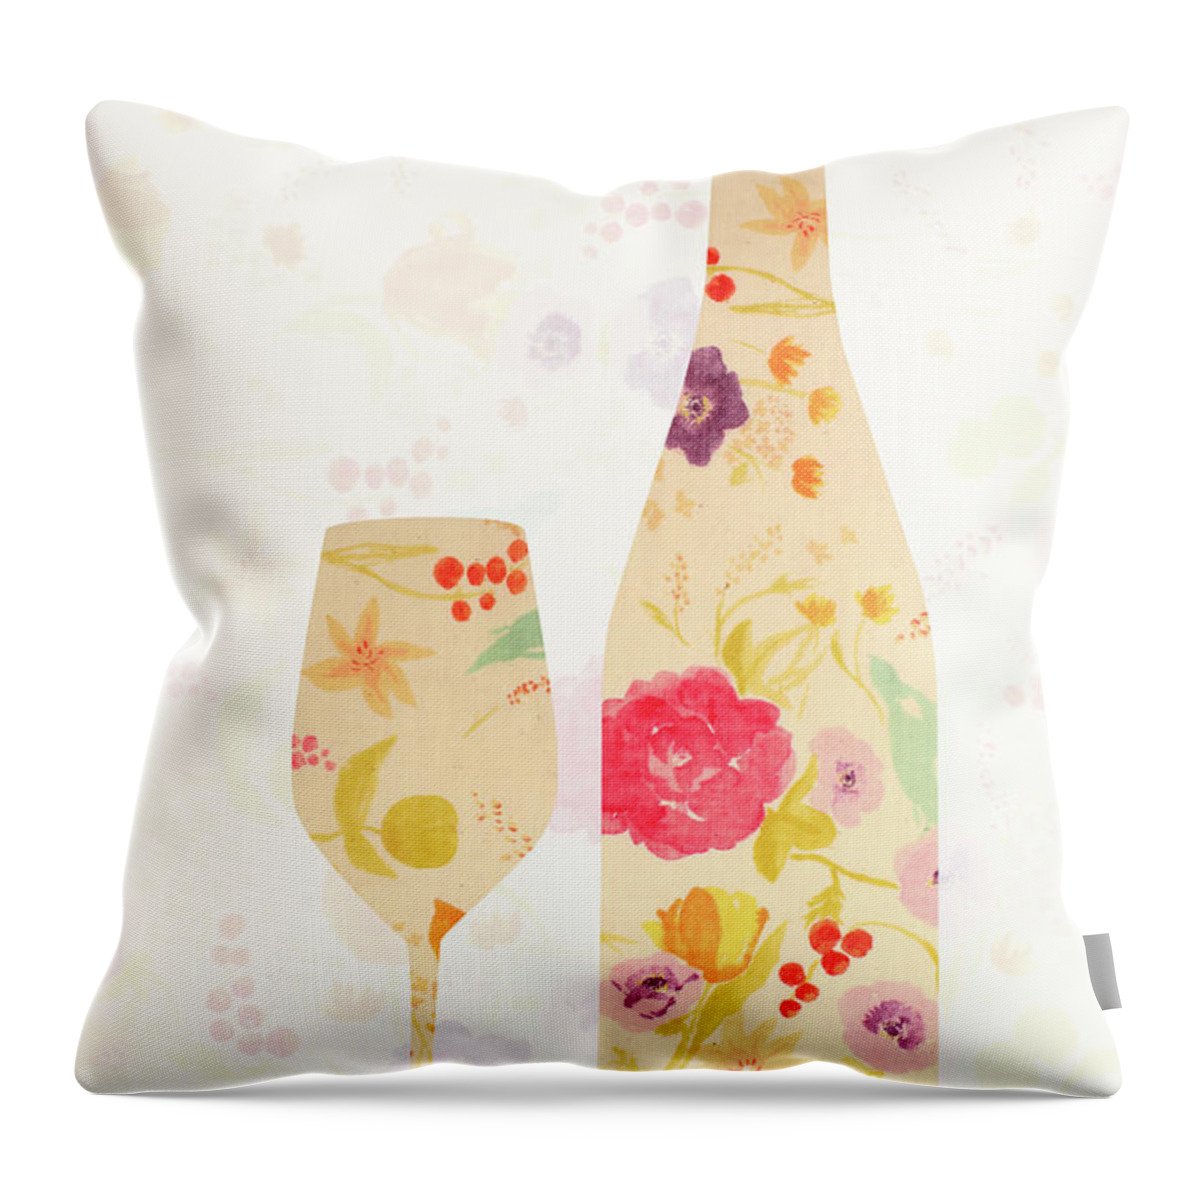 Alcohol Throw Pillow featuring the digital art Wine Bottle And Glass In Floral Pattern by Kaoru Morimasa/a.collectionrf